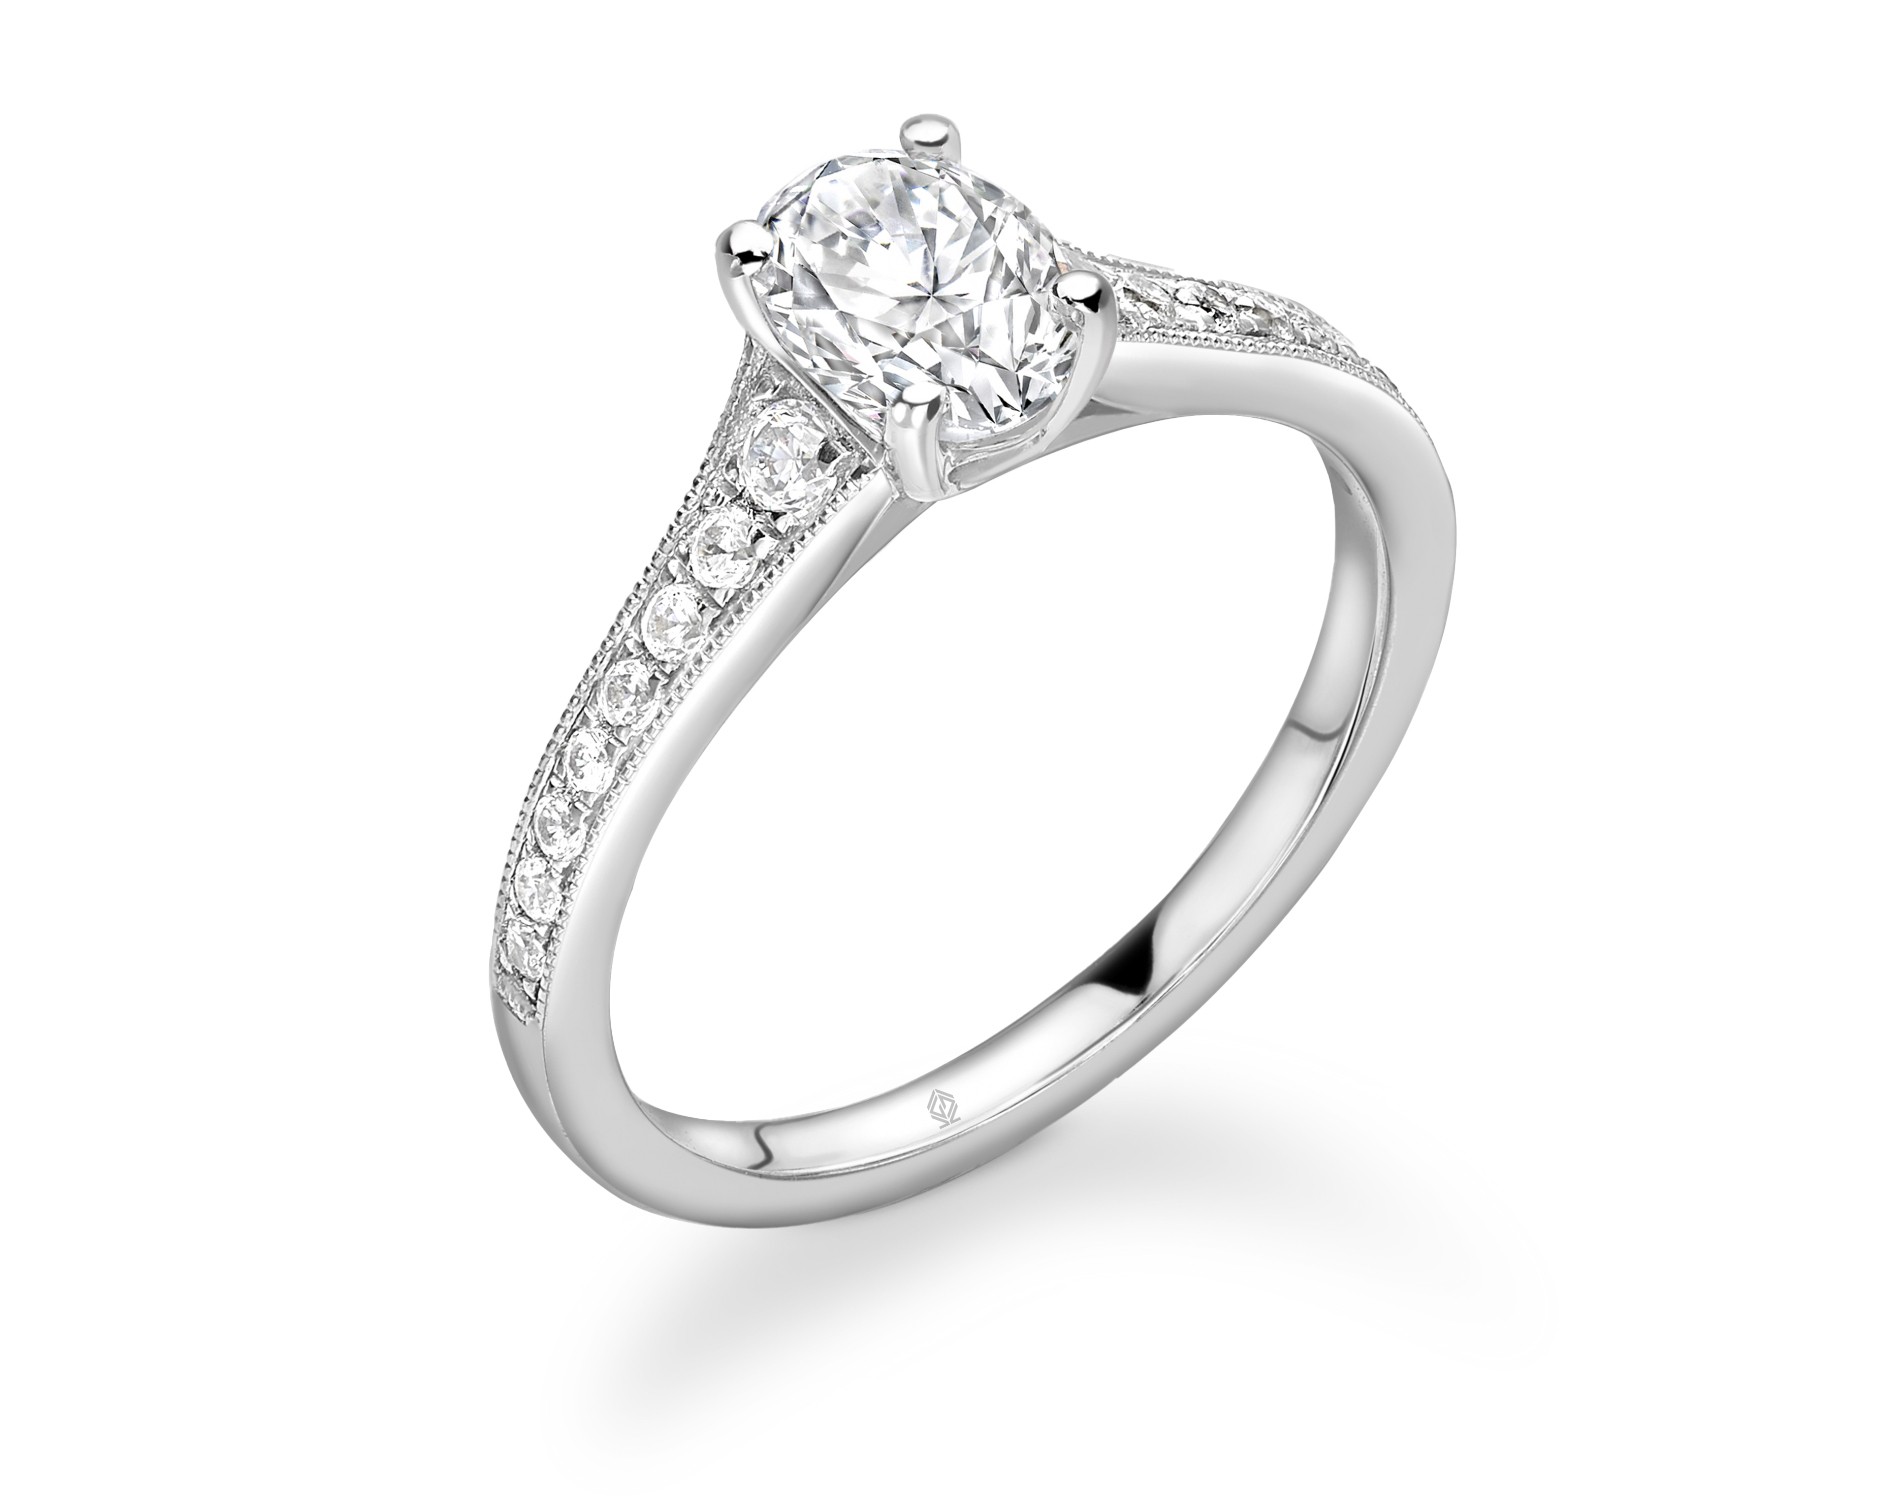 18K WHITE GOLD OVAL CUT 4 PRONGS DIAMOND ENGAGEMENT RING WITH SIDE STONES CHANNEL SET